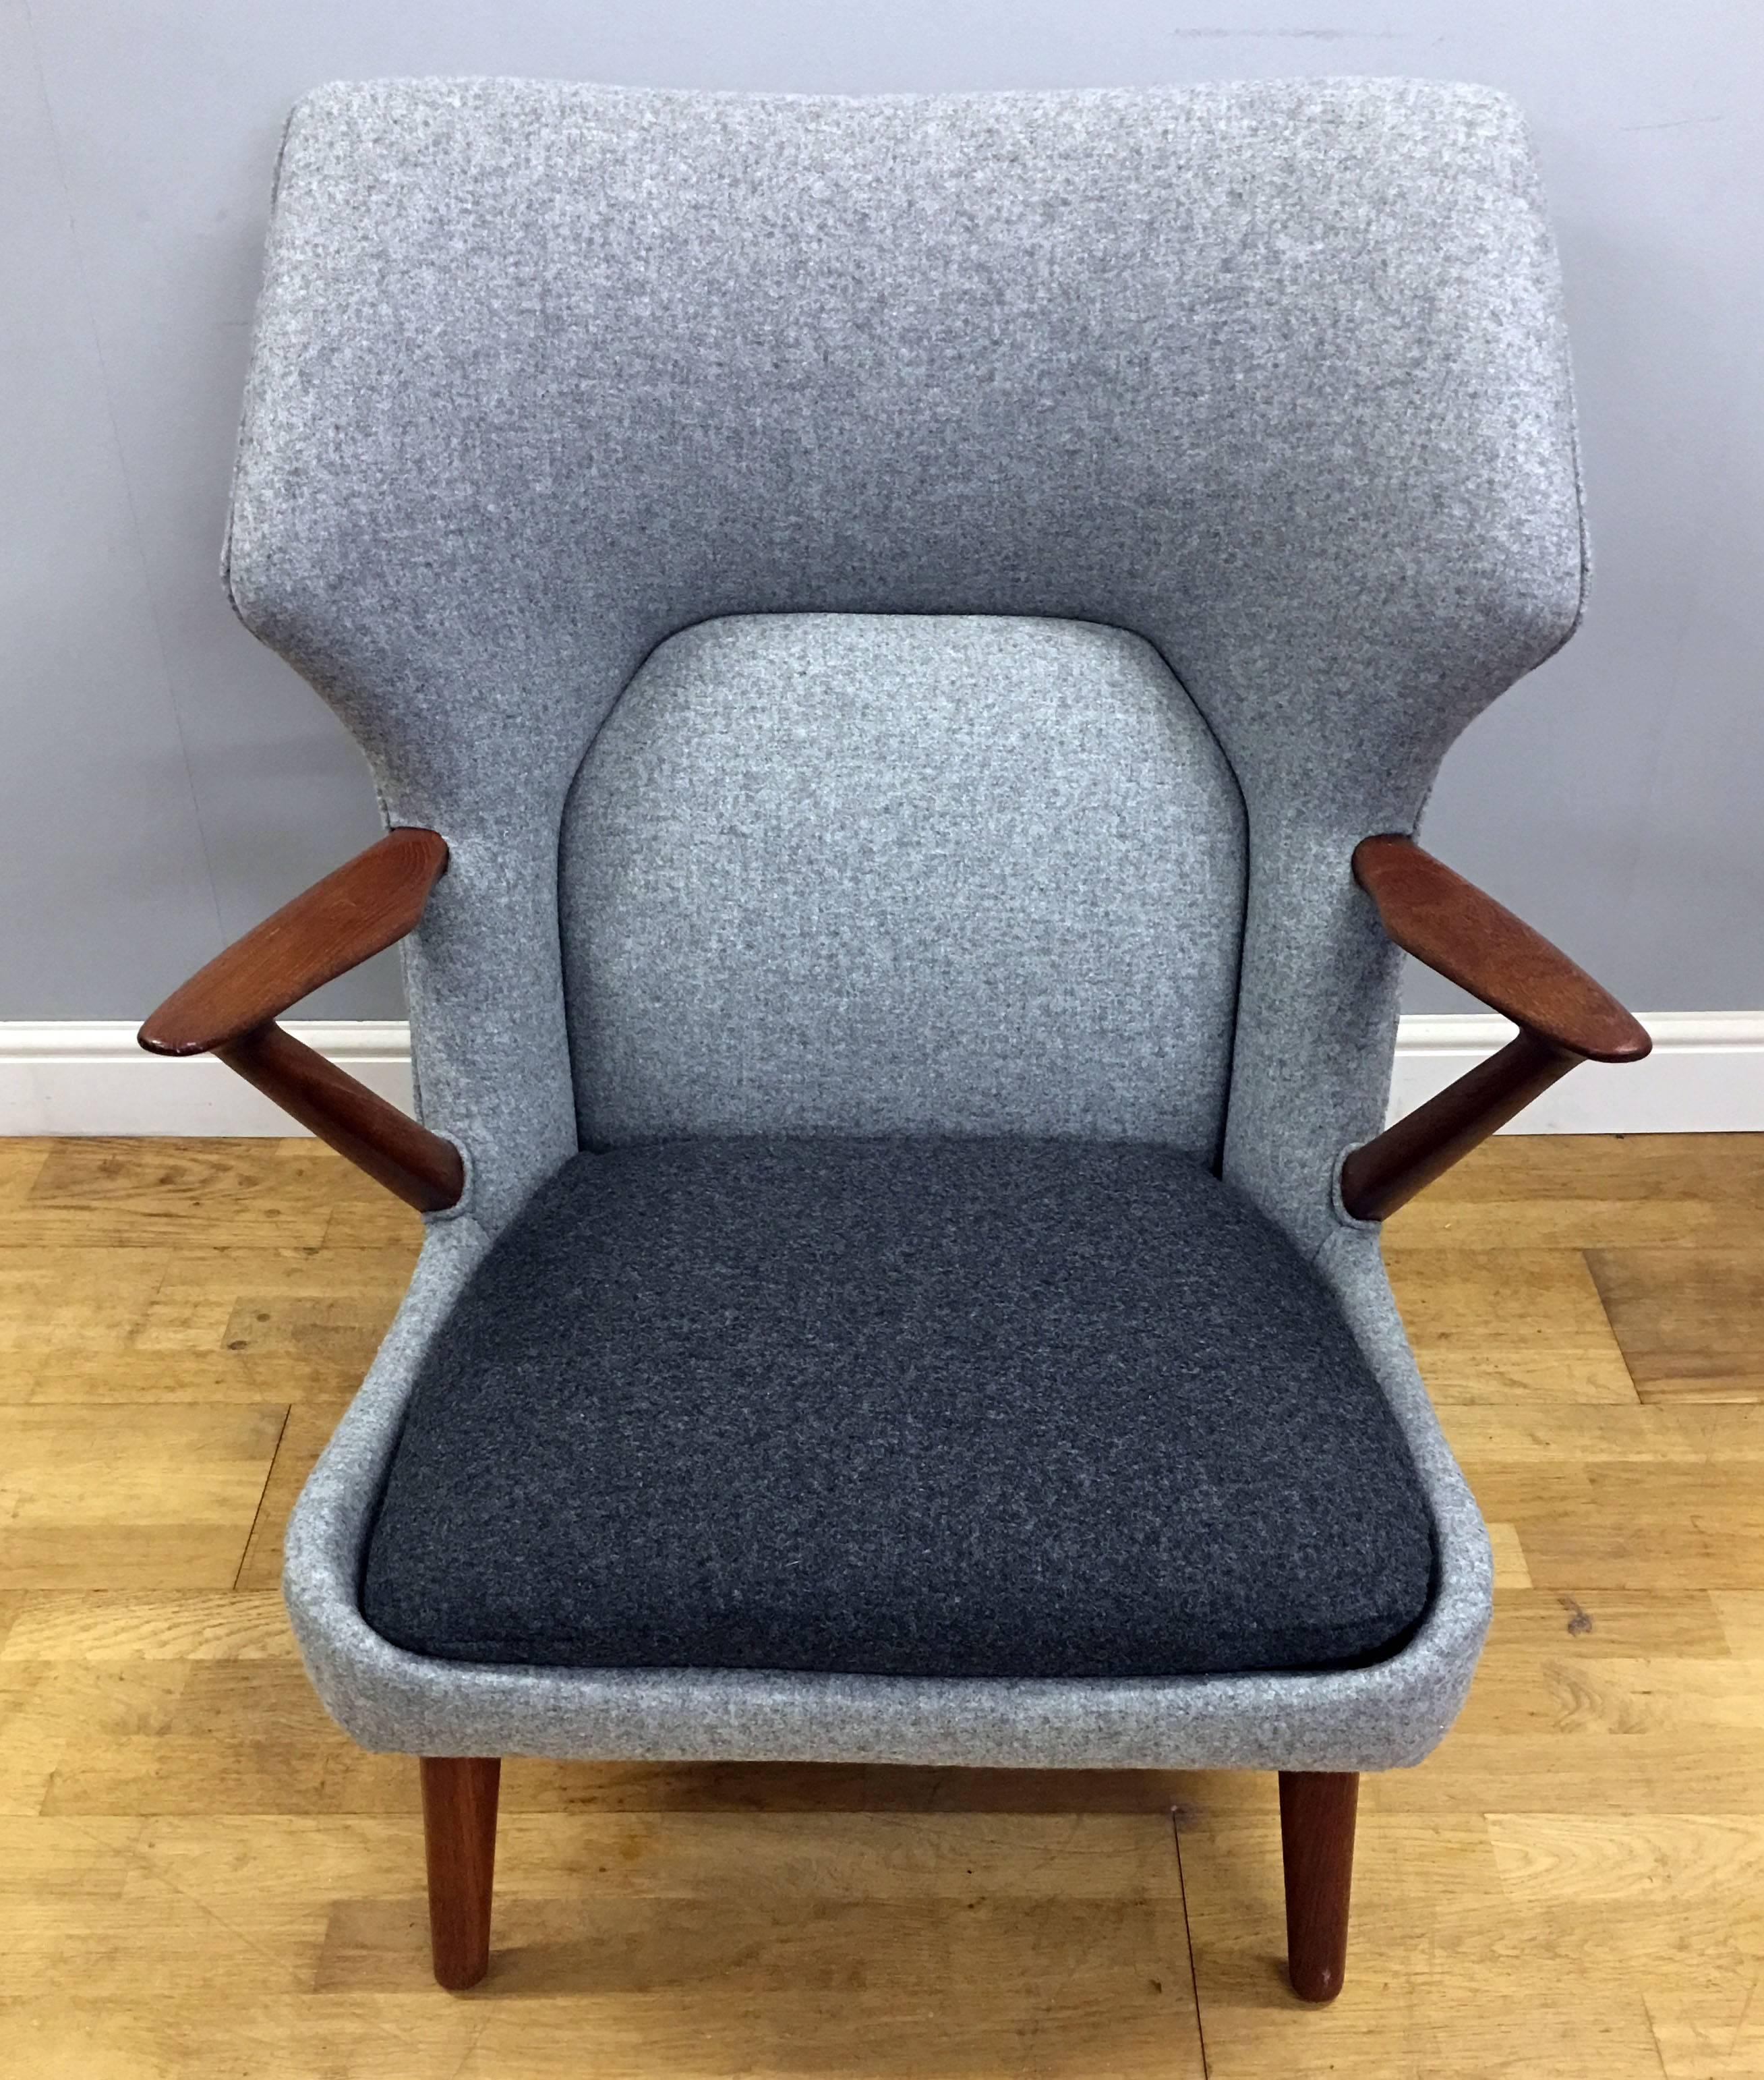 A beautiful early example, freshly reupholstered in finest quality wool fabric, as closely as possible to the original colour scheme of two shades of grey.